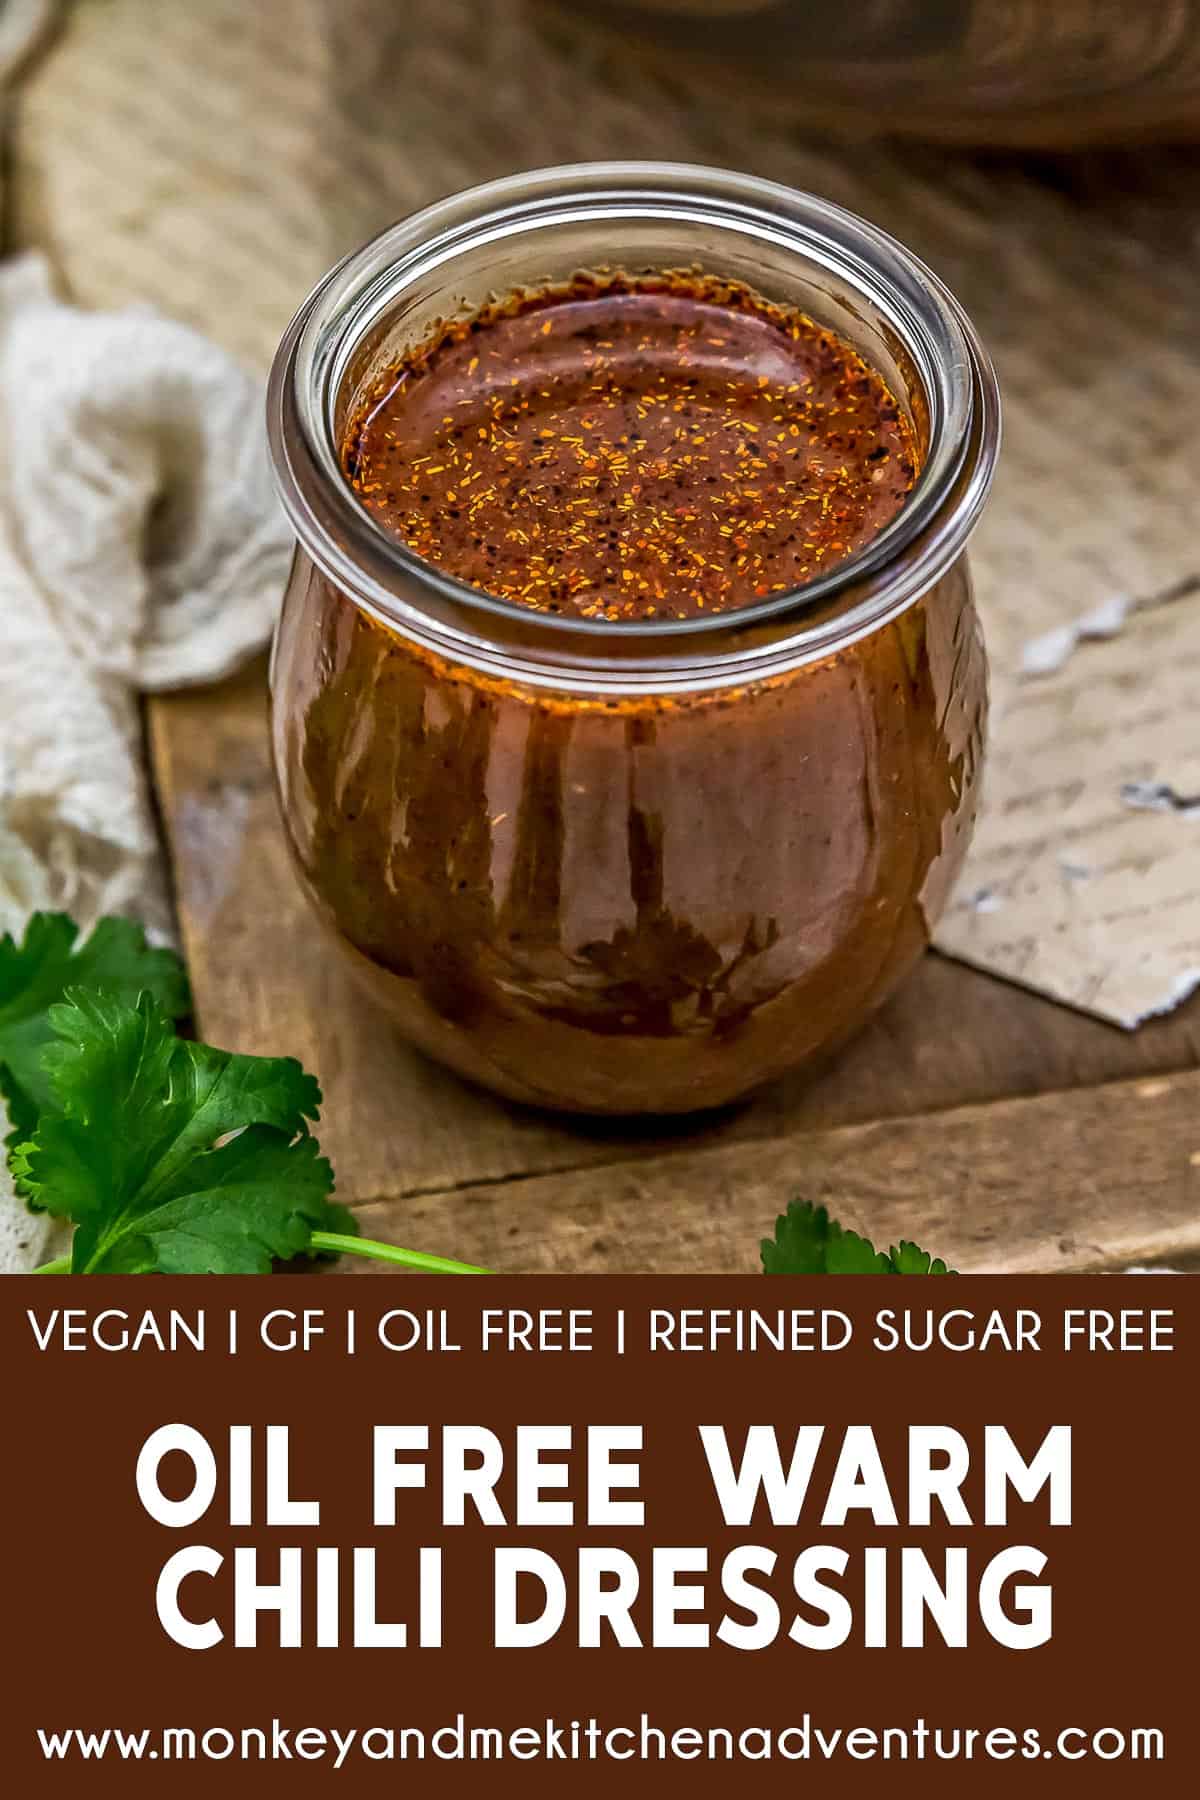 Oil Free Warm Chili Dressing with text description